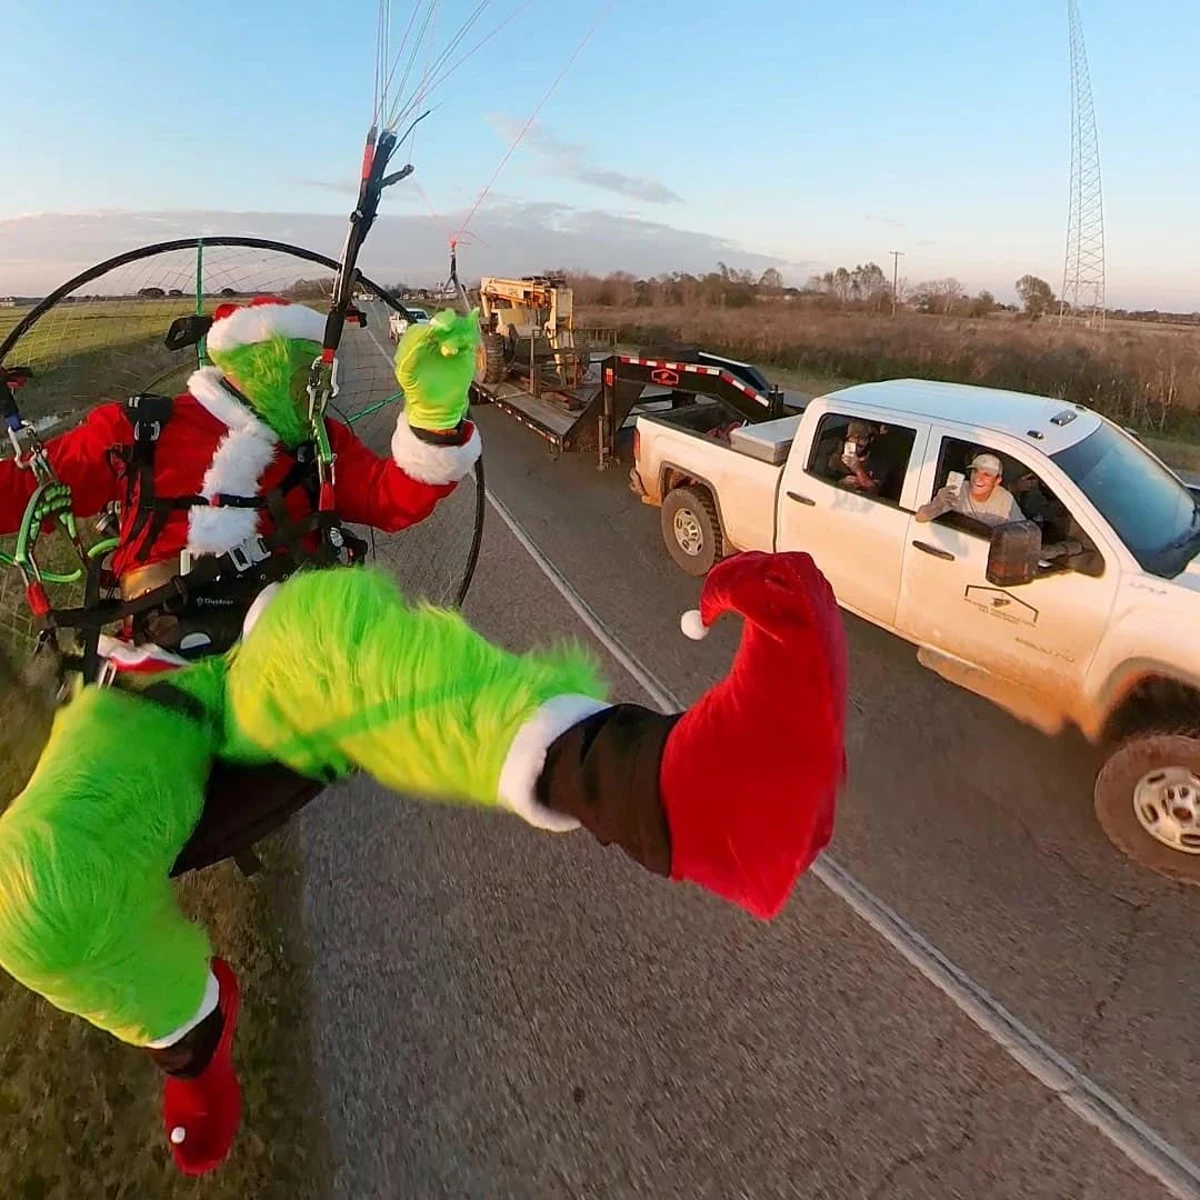  Watch For The Grinch, He’s Been Seen Flying Over Lake Charles! 